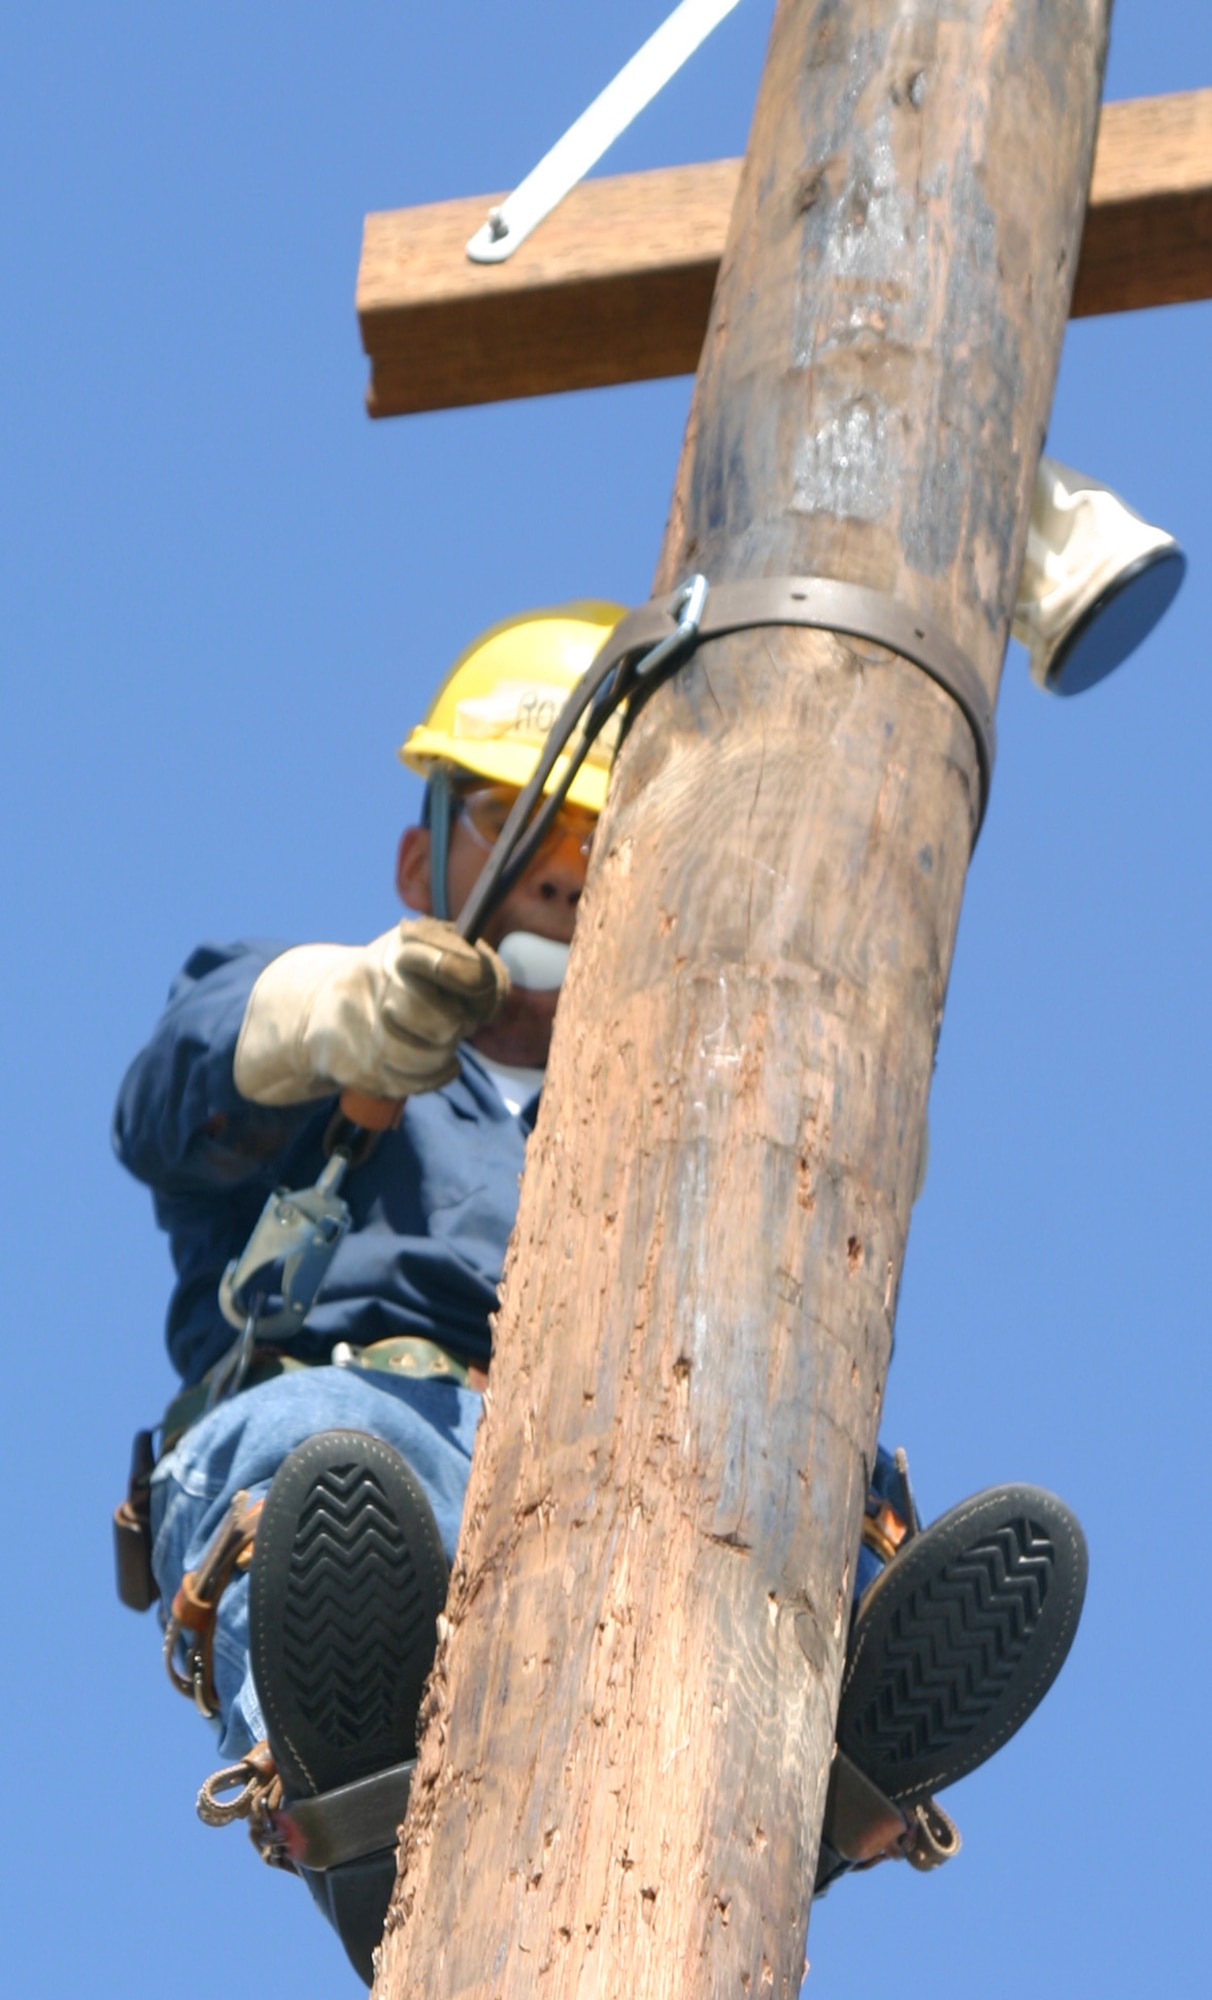 Pole jockeys competing in the Fourth Annual Lineman’s Rodeo May 20 had to complete the egg climb as quickly and safely as possible without breaking the egg they carried in their mouth. Above, Airman 1st Class Jose Rodriguez of the 366th Training Squadron prepares to go down a utility pole during the timed event. (U.S. Air Force photo/Senior Airman Tonnette Thompson).